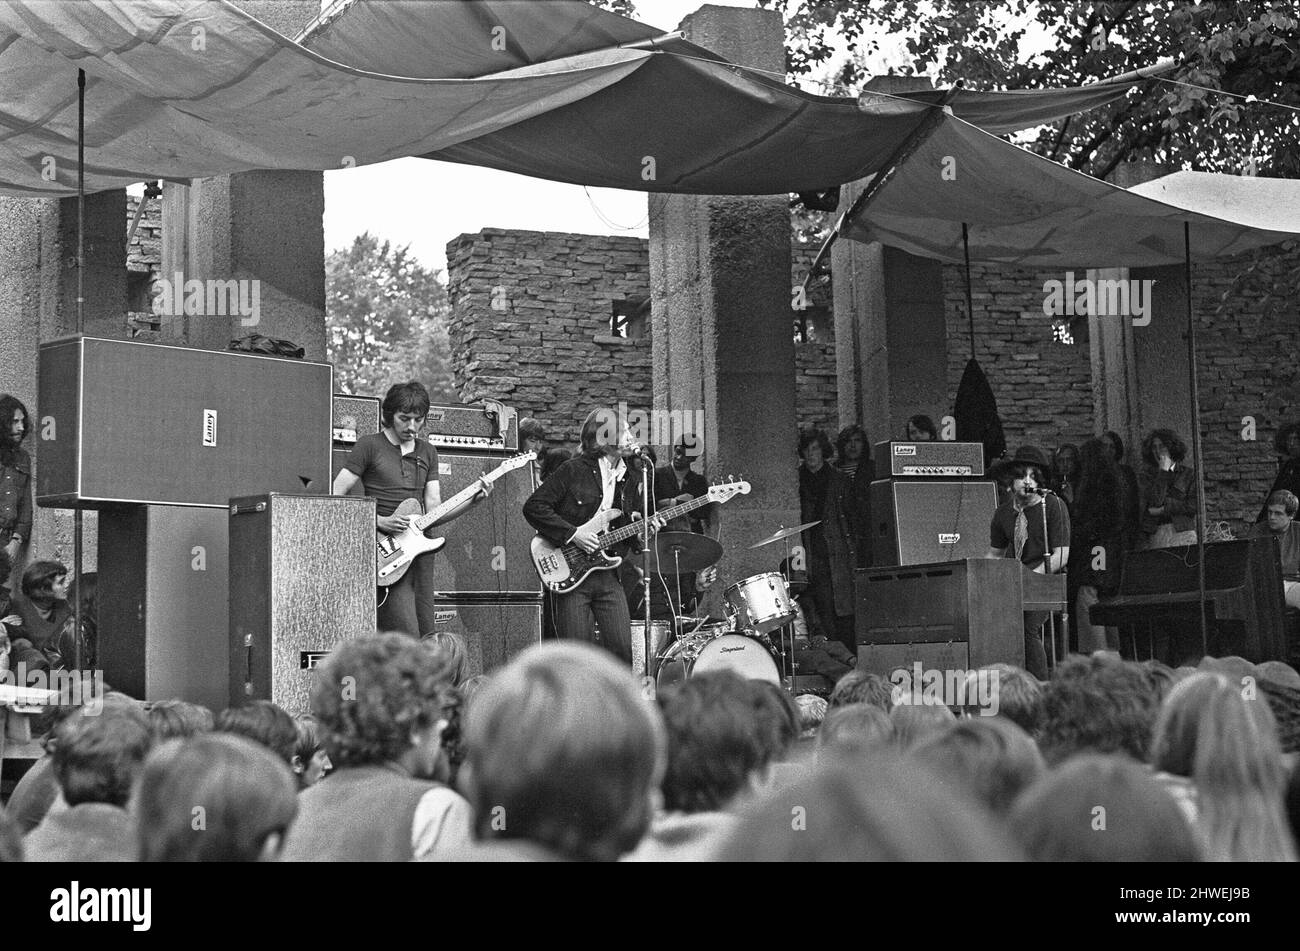 Cannon Hill Park New People Concert. 31st August 1969. They came quietly into the park. The new generation, conforming to the new rule of looking unusual, were on another of their pilgrimages to their own world of loud noise and little conversation.  This time the blues were free at a concert in Birmingham's Cannon Hill Park, but it could have been anywhere. The faces are not important: it is the look that counts.  Hair stands on end or hangs in limp tangles, the most switched-on clothes are bought secondhand, faded jeans are patched not because of holes but because of fashion. It is all an im Stock Photo